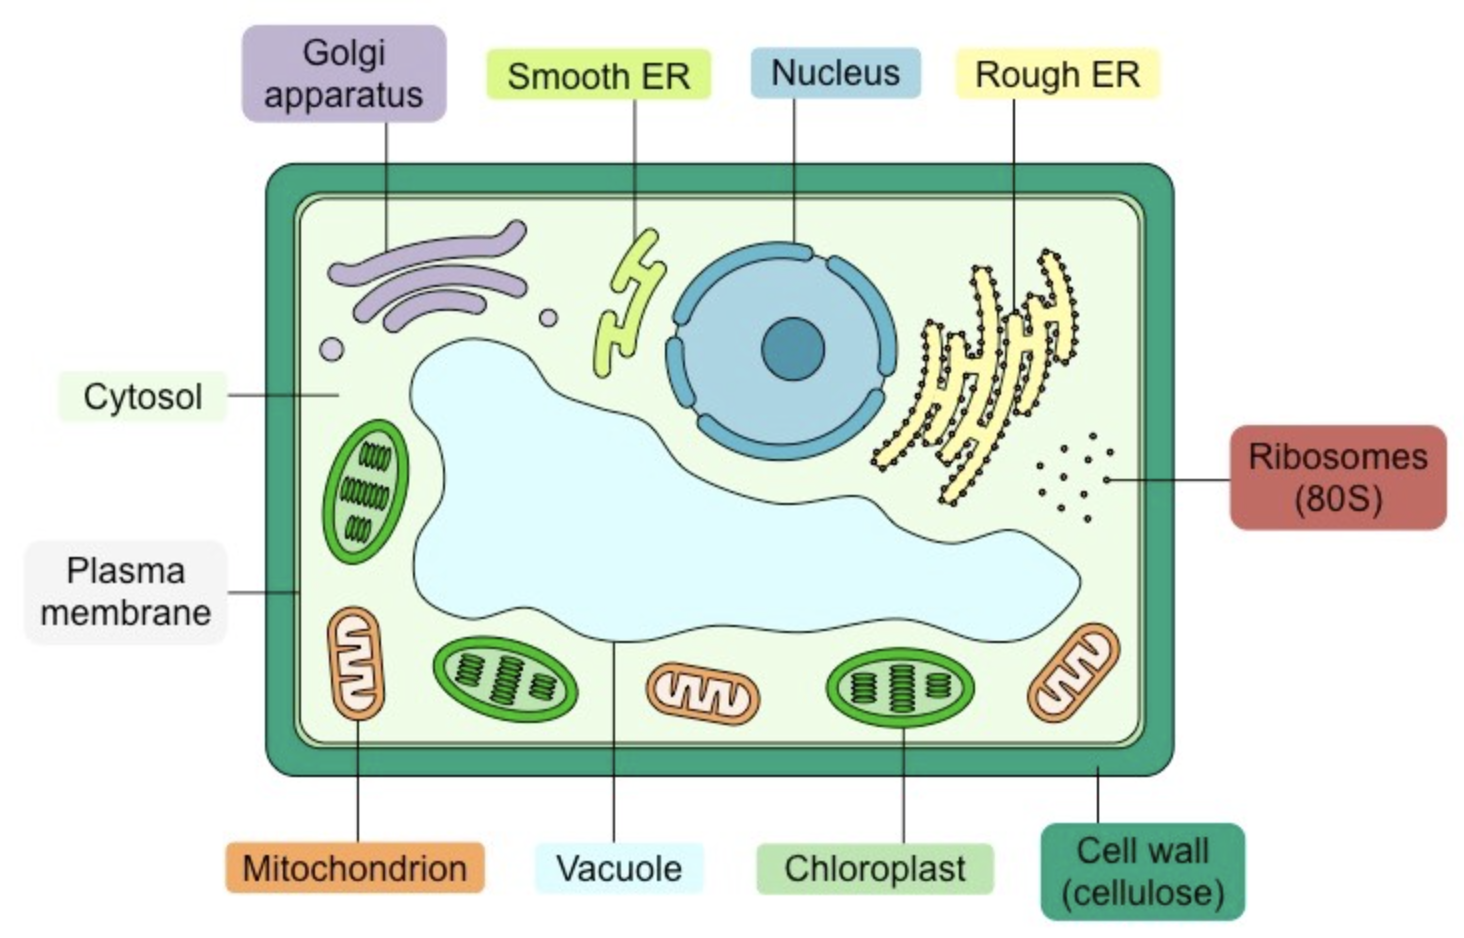 <p><strong><span>Key Features:</span></strong></p><ul><li><p><em>Vacuole</em><span> – large and occupying majority of central space (surrounded by tonoplast)</span></p></li><li><p><em>Chloroplasts</em><span> – double membrane with internal stacks of membrane discs (only present in photosynthetic tissue)</span></p></li><li><p><em>Cell wall </em><span>– labelled as being composed of cellulose ; thicker than cell membrane</span></p></li><li><p><em>Shape</em><span> – brick-like shape with rounded corners</span></p></li></ul>